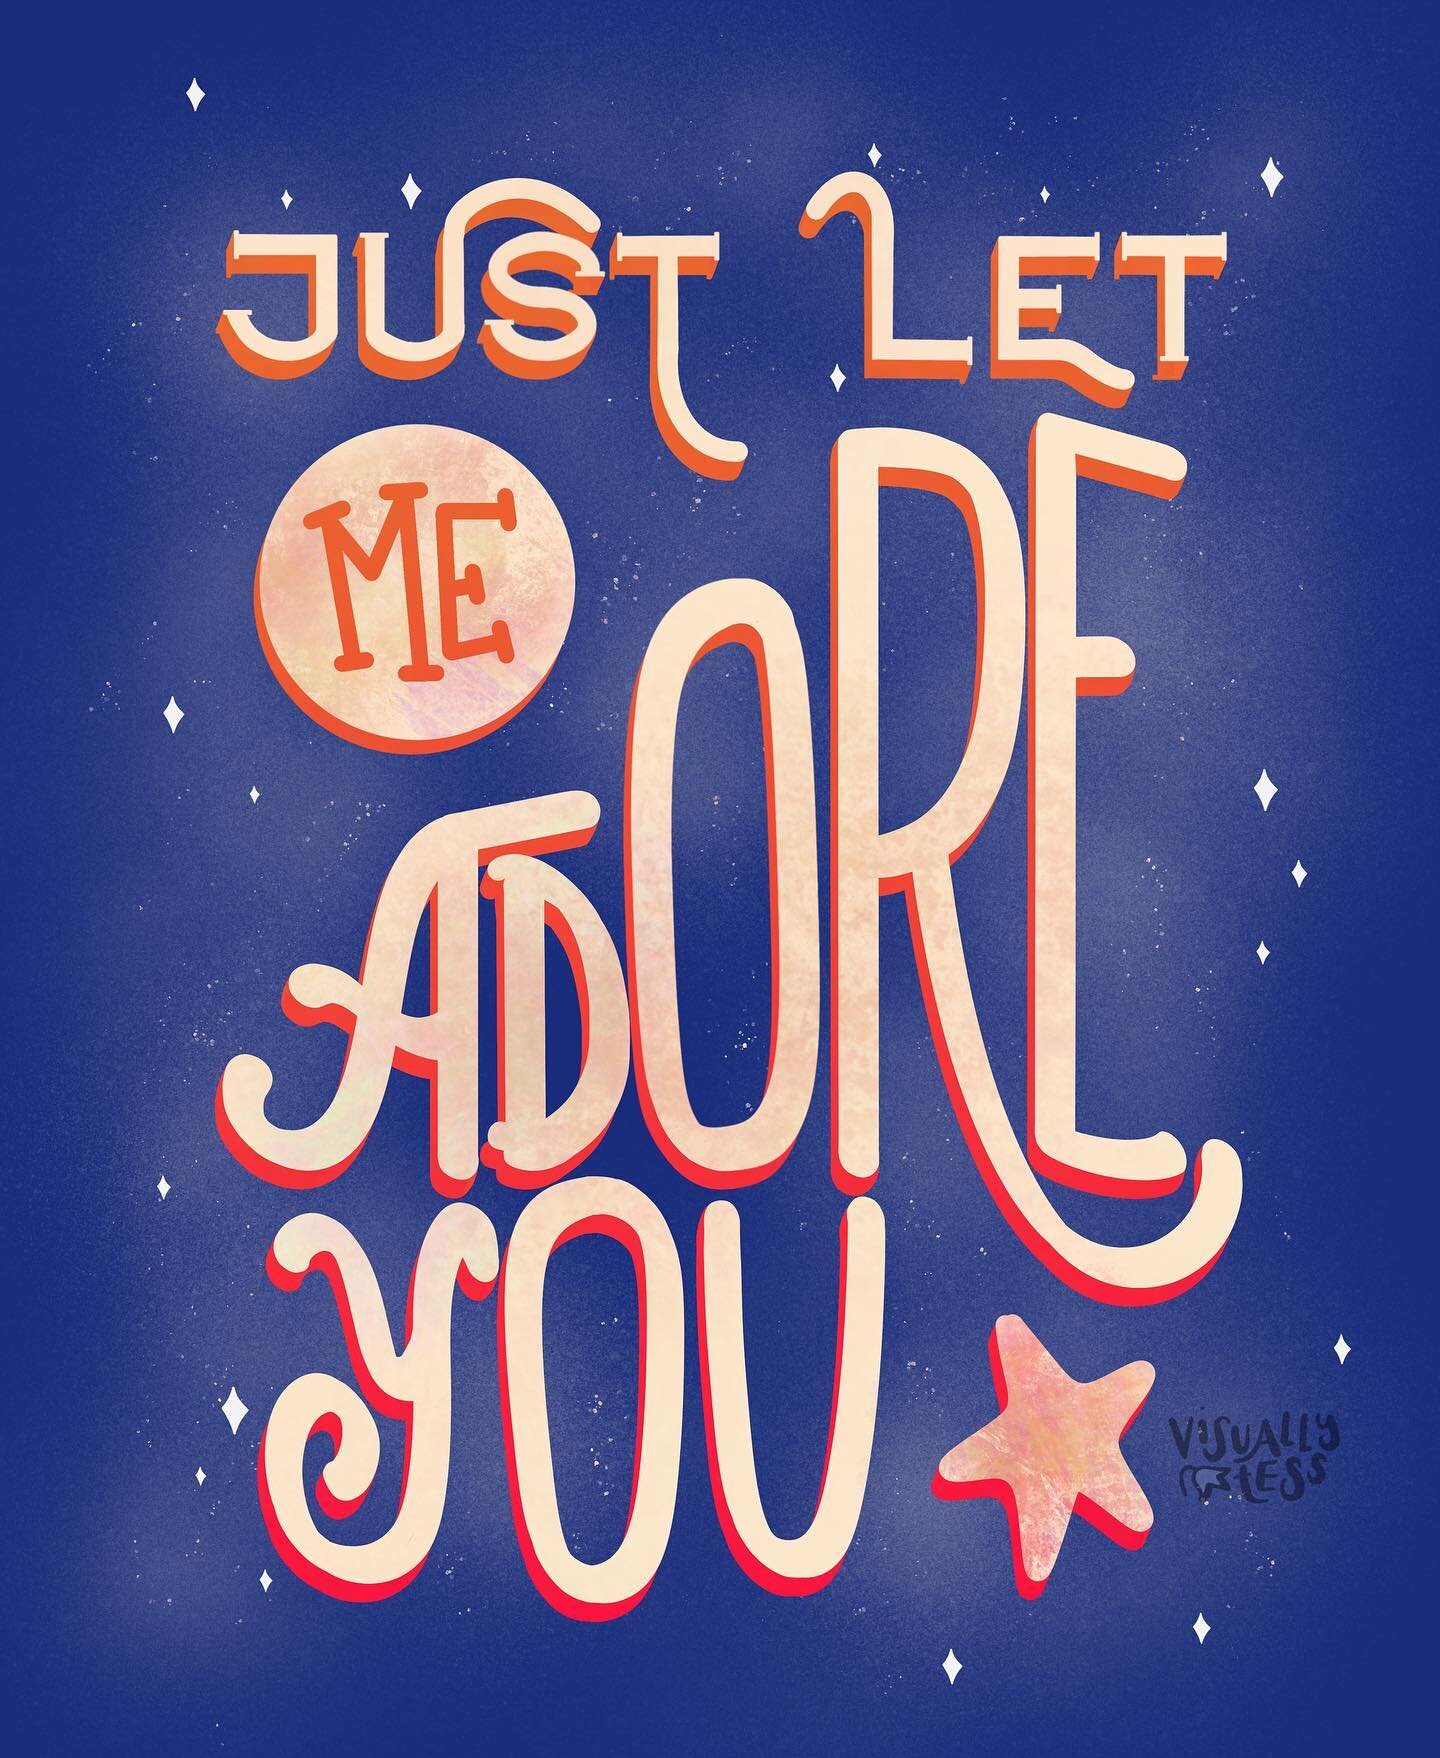 Just let me adore you 🎶 Happy Easter Monday everyone ☀️✨
.
#easter #eastermonday #harrystyles #typography #typographicposter #typedesign #lyrics #adoreyou #typographydesign #typeface #typefacedesign #handlettering #handlettered #handletter #artdaily